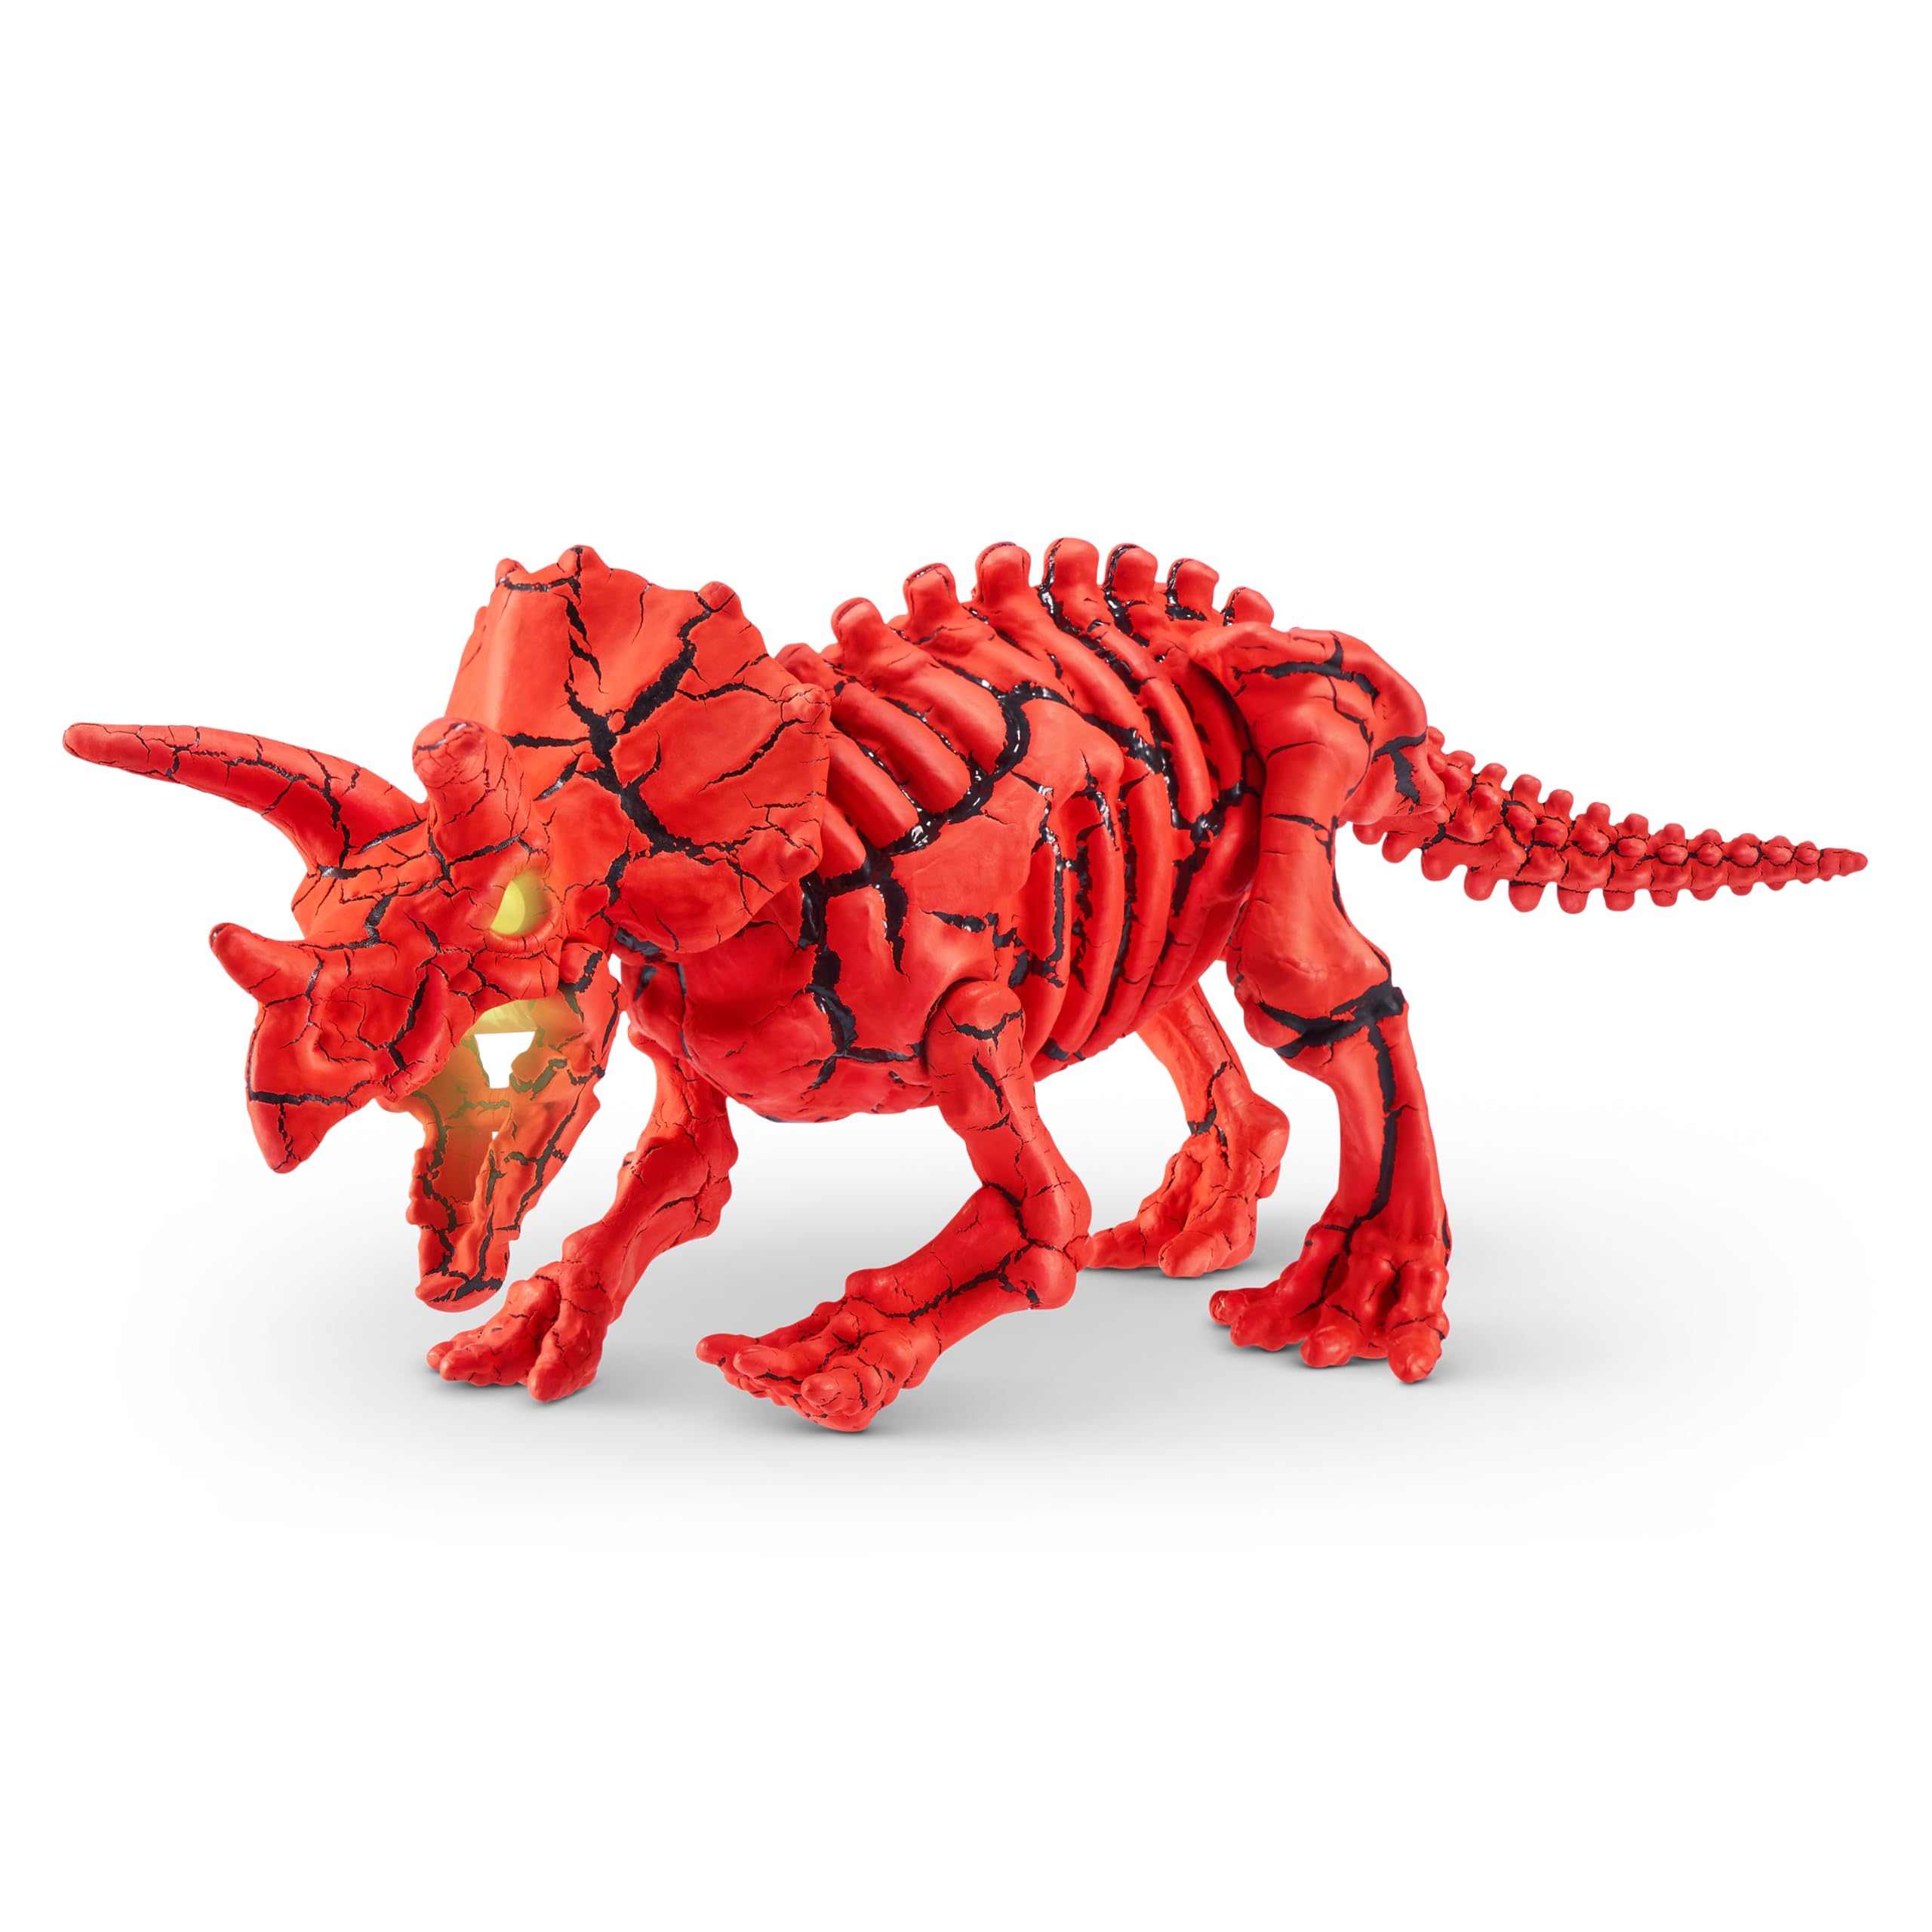 Robo Alive Volcano Dino Fossil Find Triceratops by ZURU Boys Age 5+ Dig and Discover, STEM -Excavate Prehistoric Fossils, Educational Toys, Great Science Kit Gift (Triceratops)